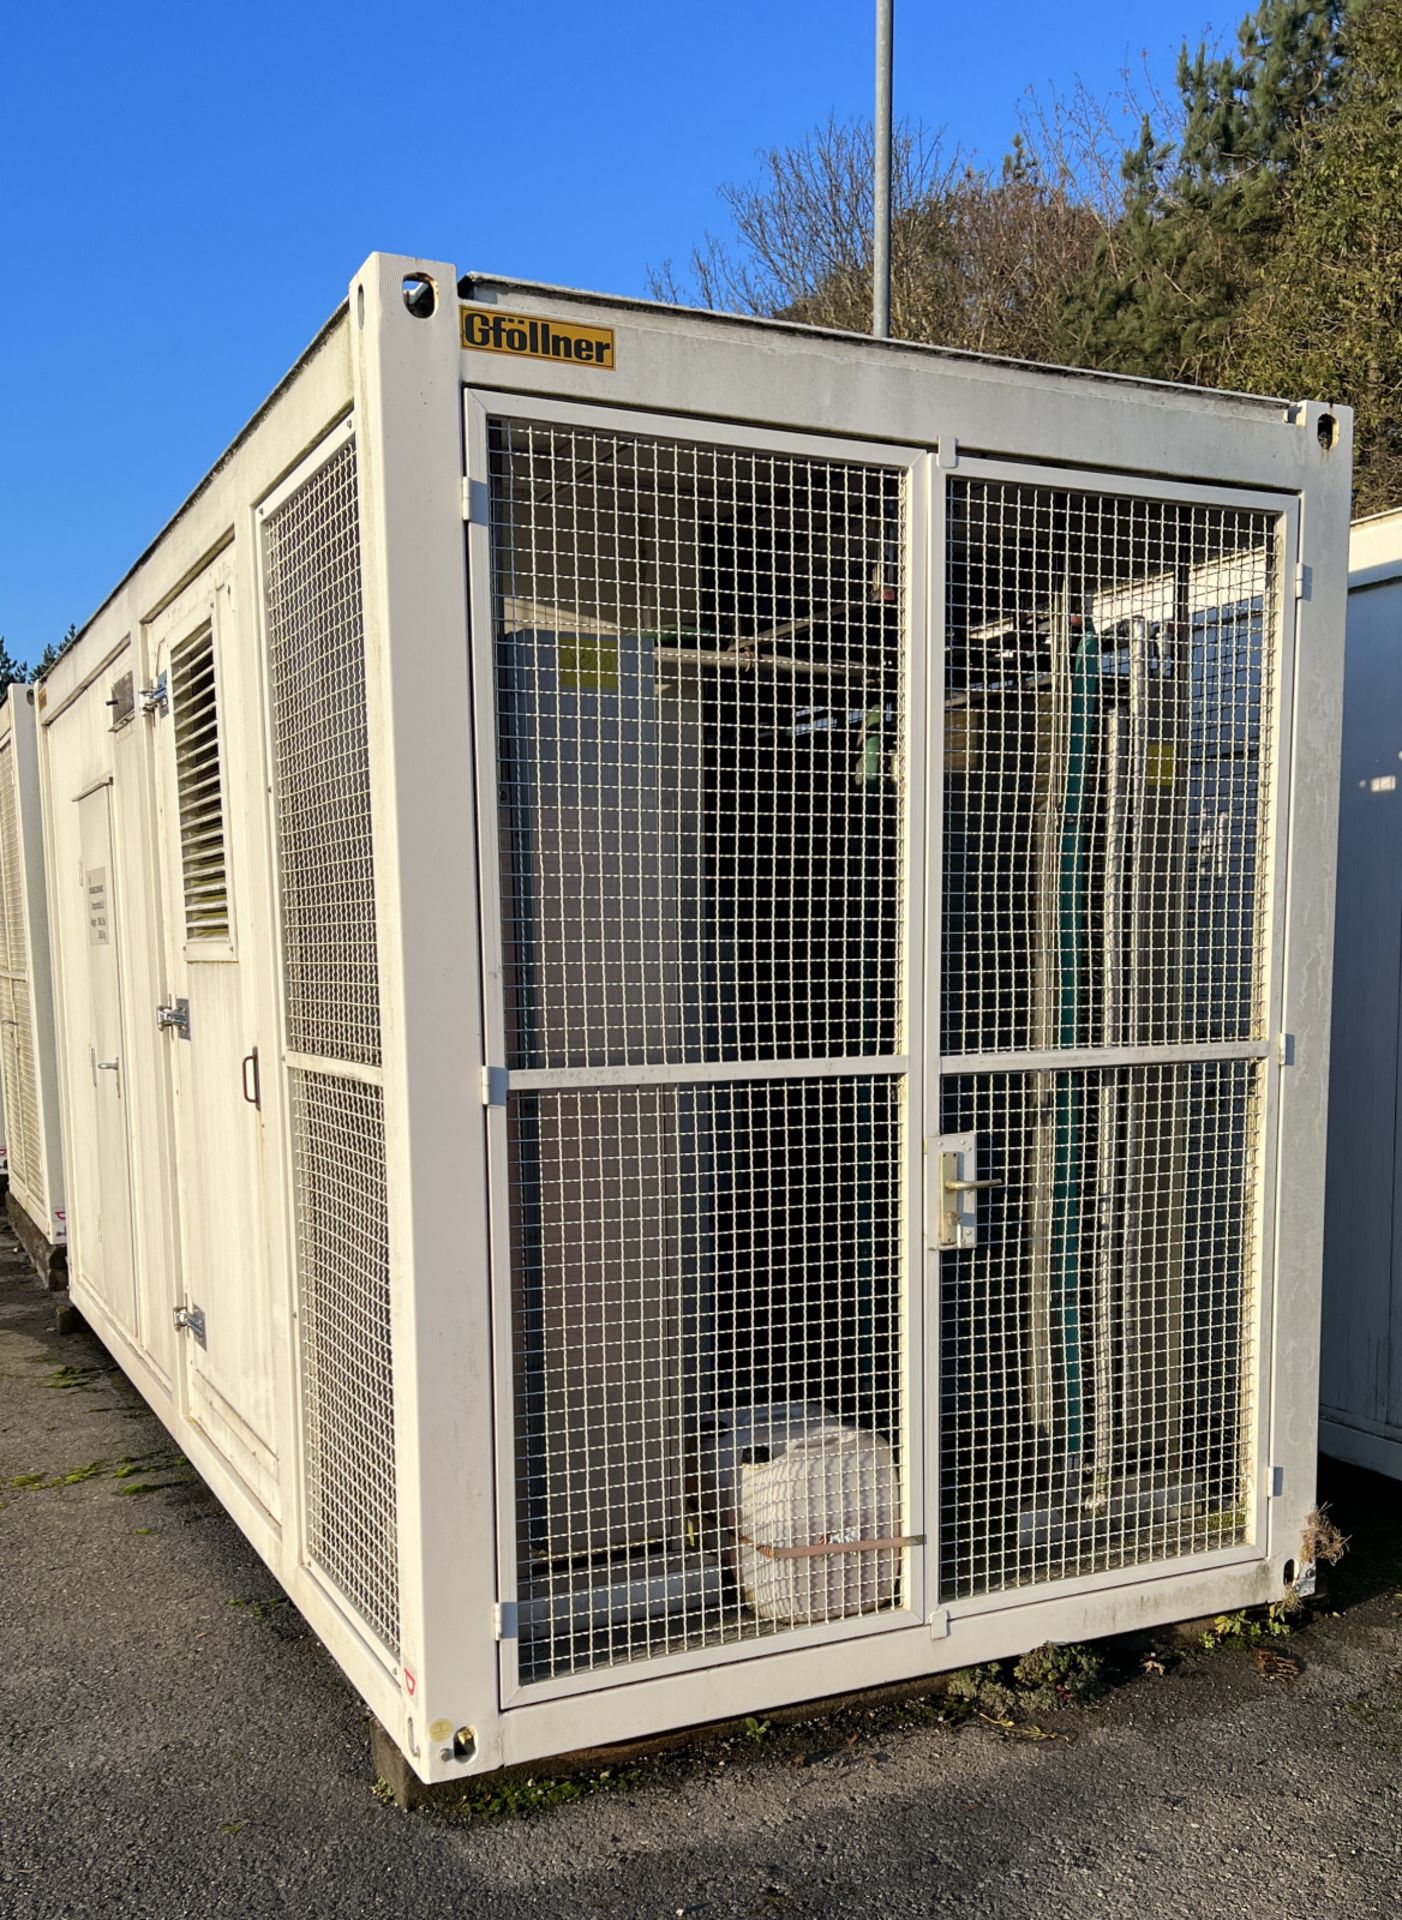 2x 20ft insulated ISO containers containing Rohde & Schwarz transmission equipment - see description - Image 5 of 44